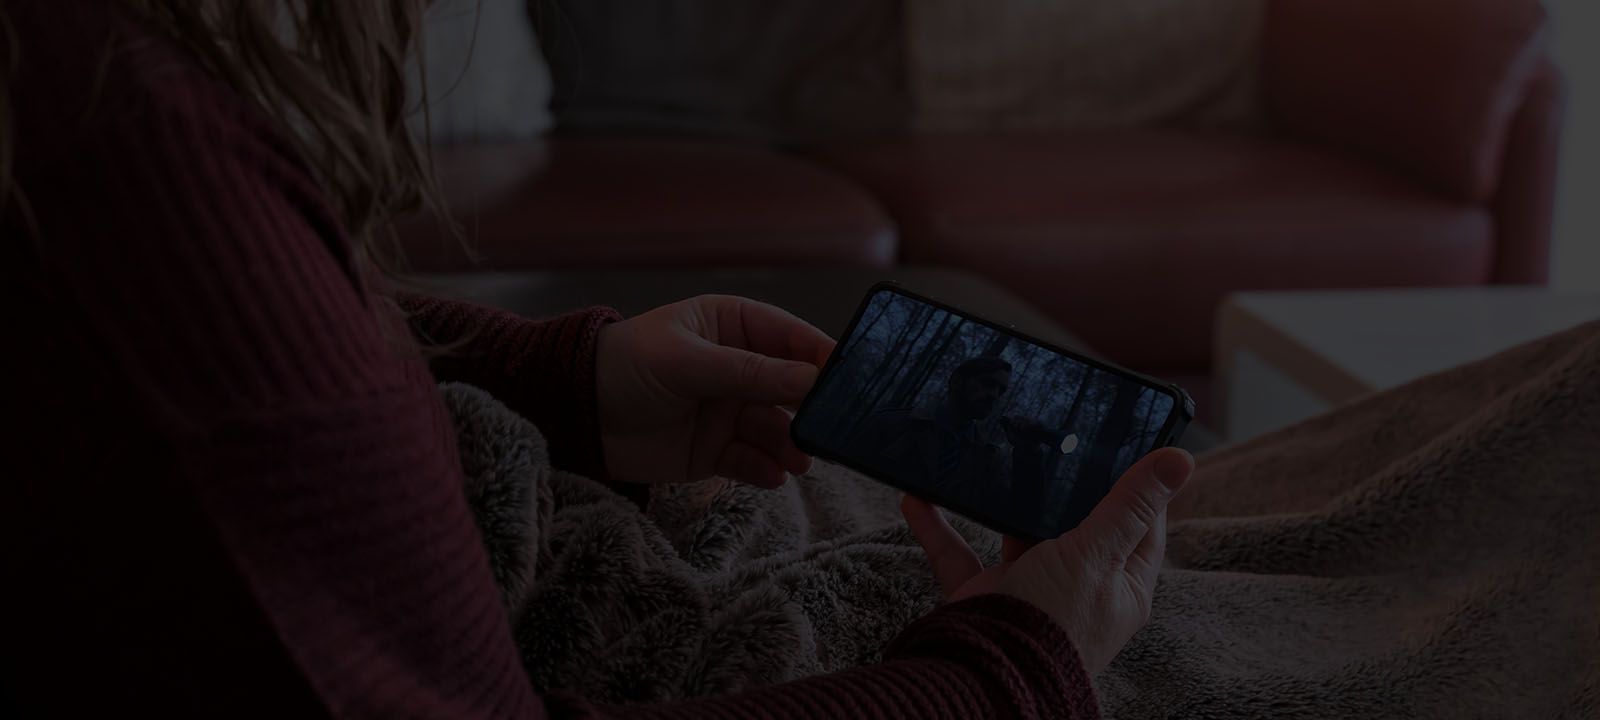 Someone under a blanket, watching a movie on their 5G phone 